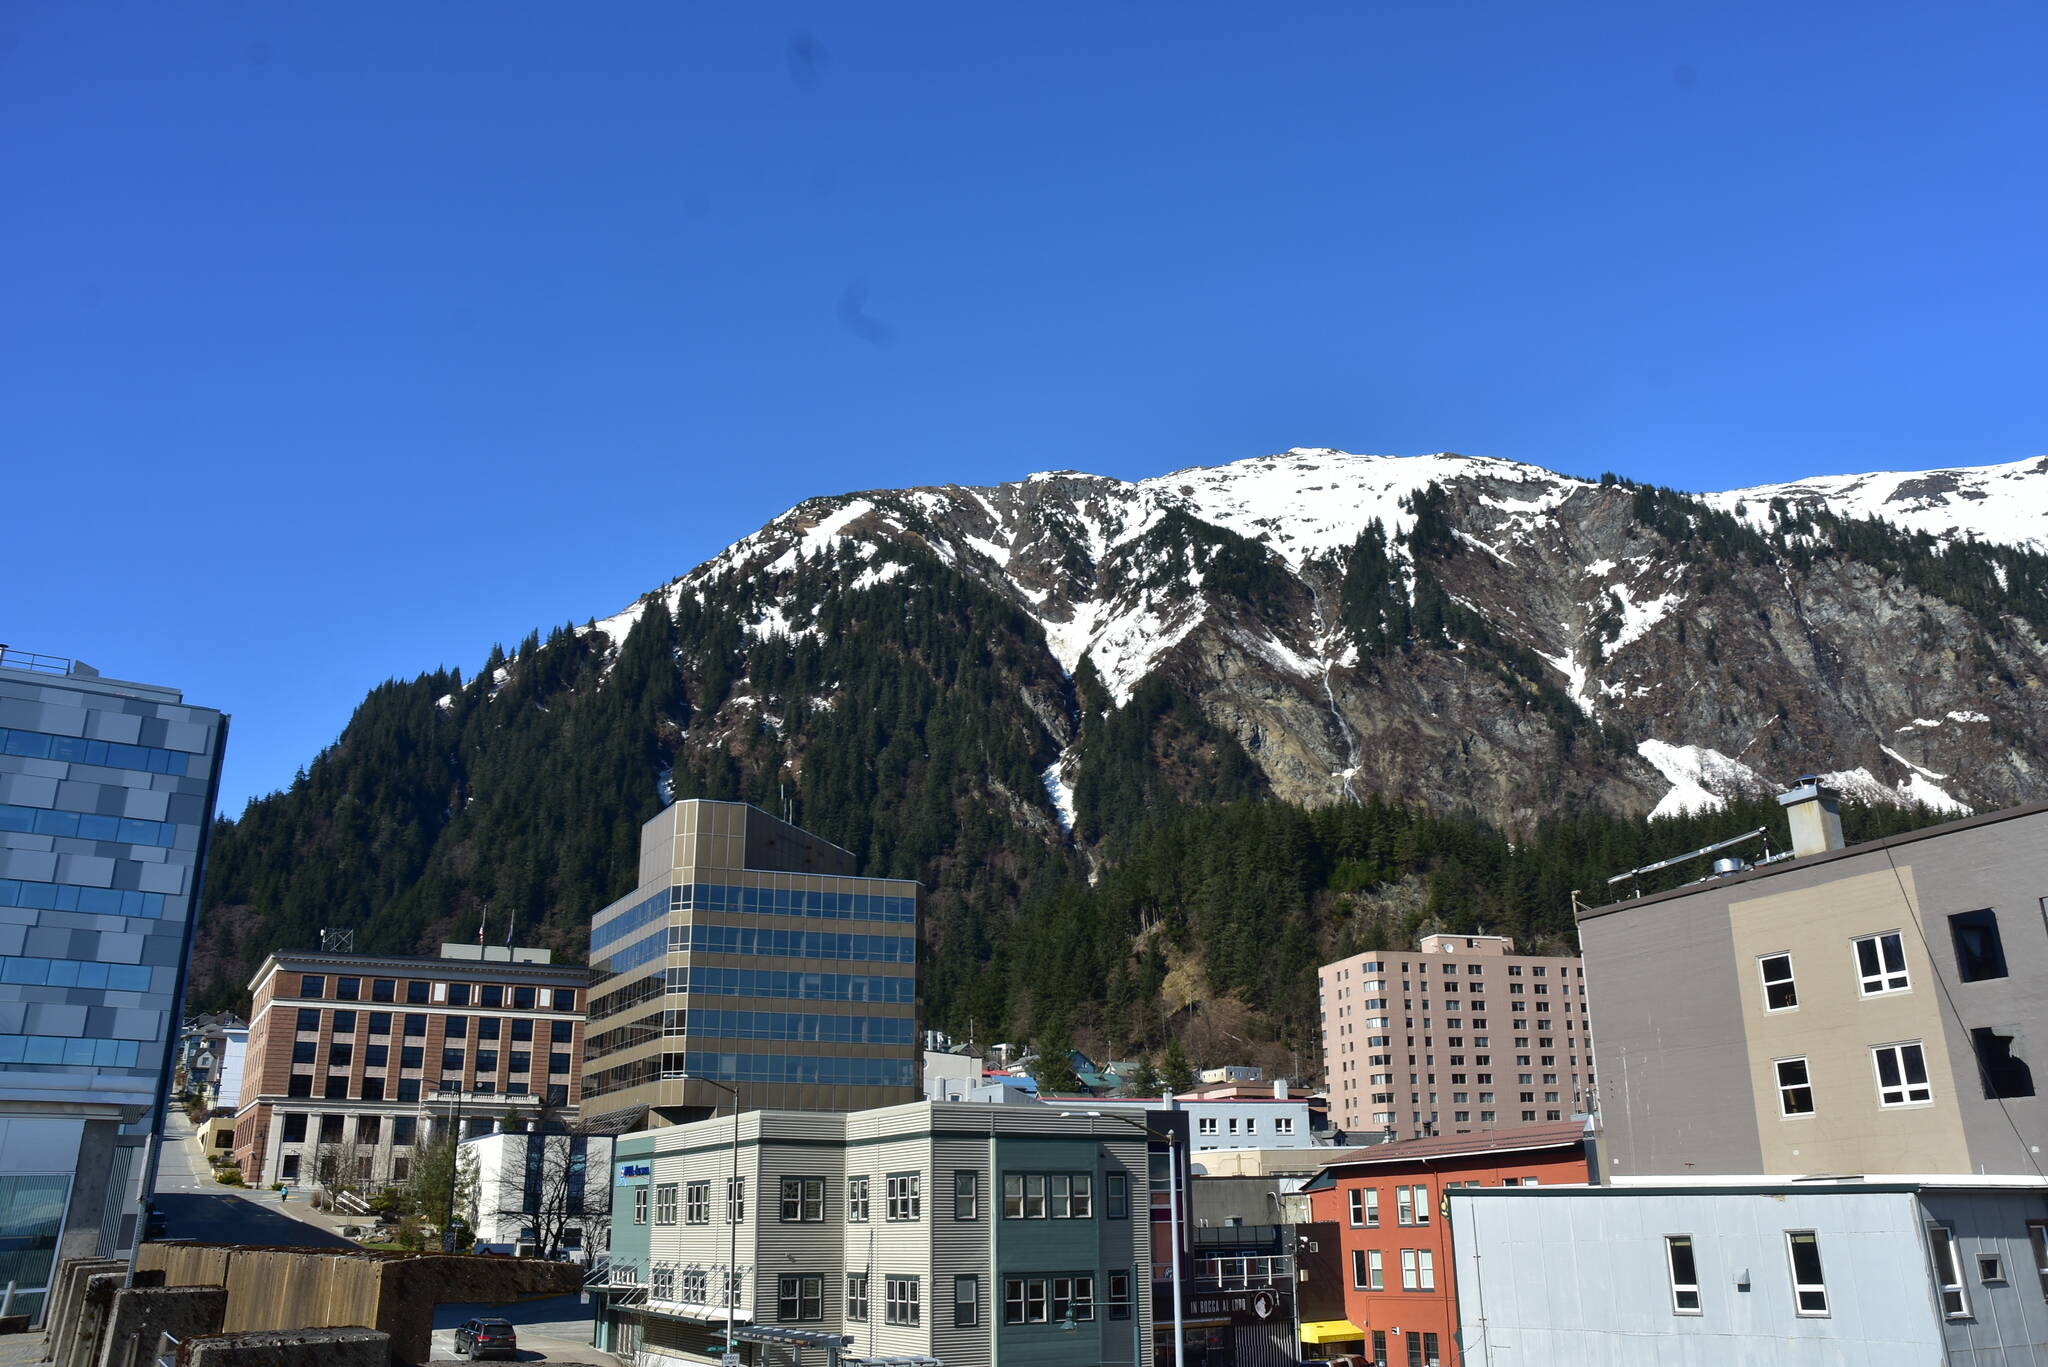 Commercial property owners throughout the city filed 210 tax appeals this year. On Wednesday night, Jeff Rogers, finance director for the City and Borough of Juneau, told the city’s Finance Committee that 130  appeals had been closed and 80 appeals remain open. (Peter Segall / Juneau Empire File)